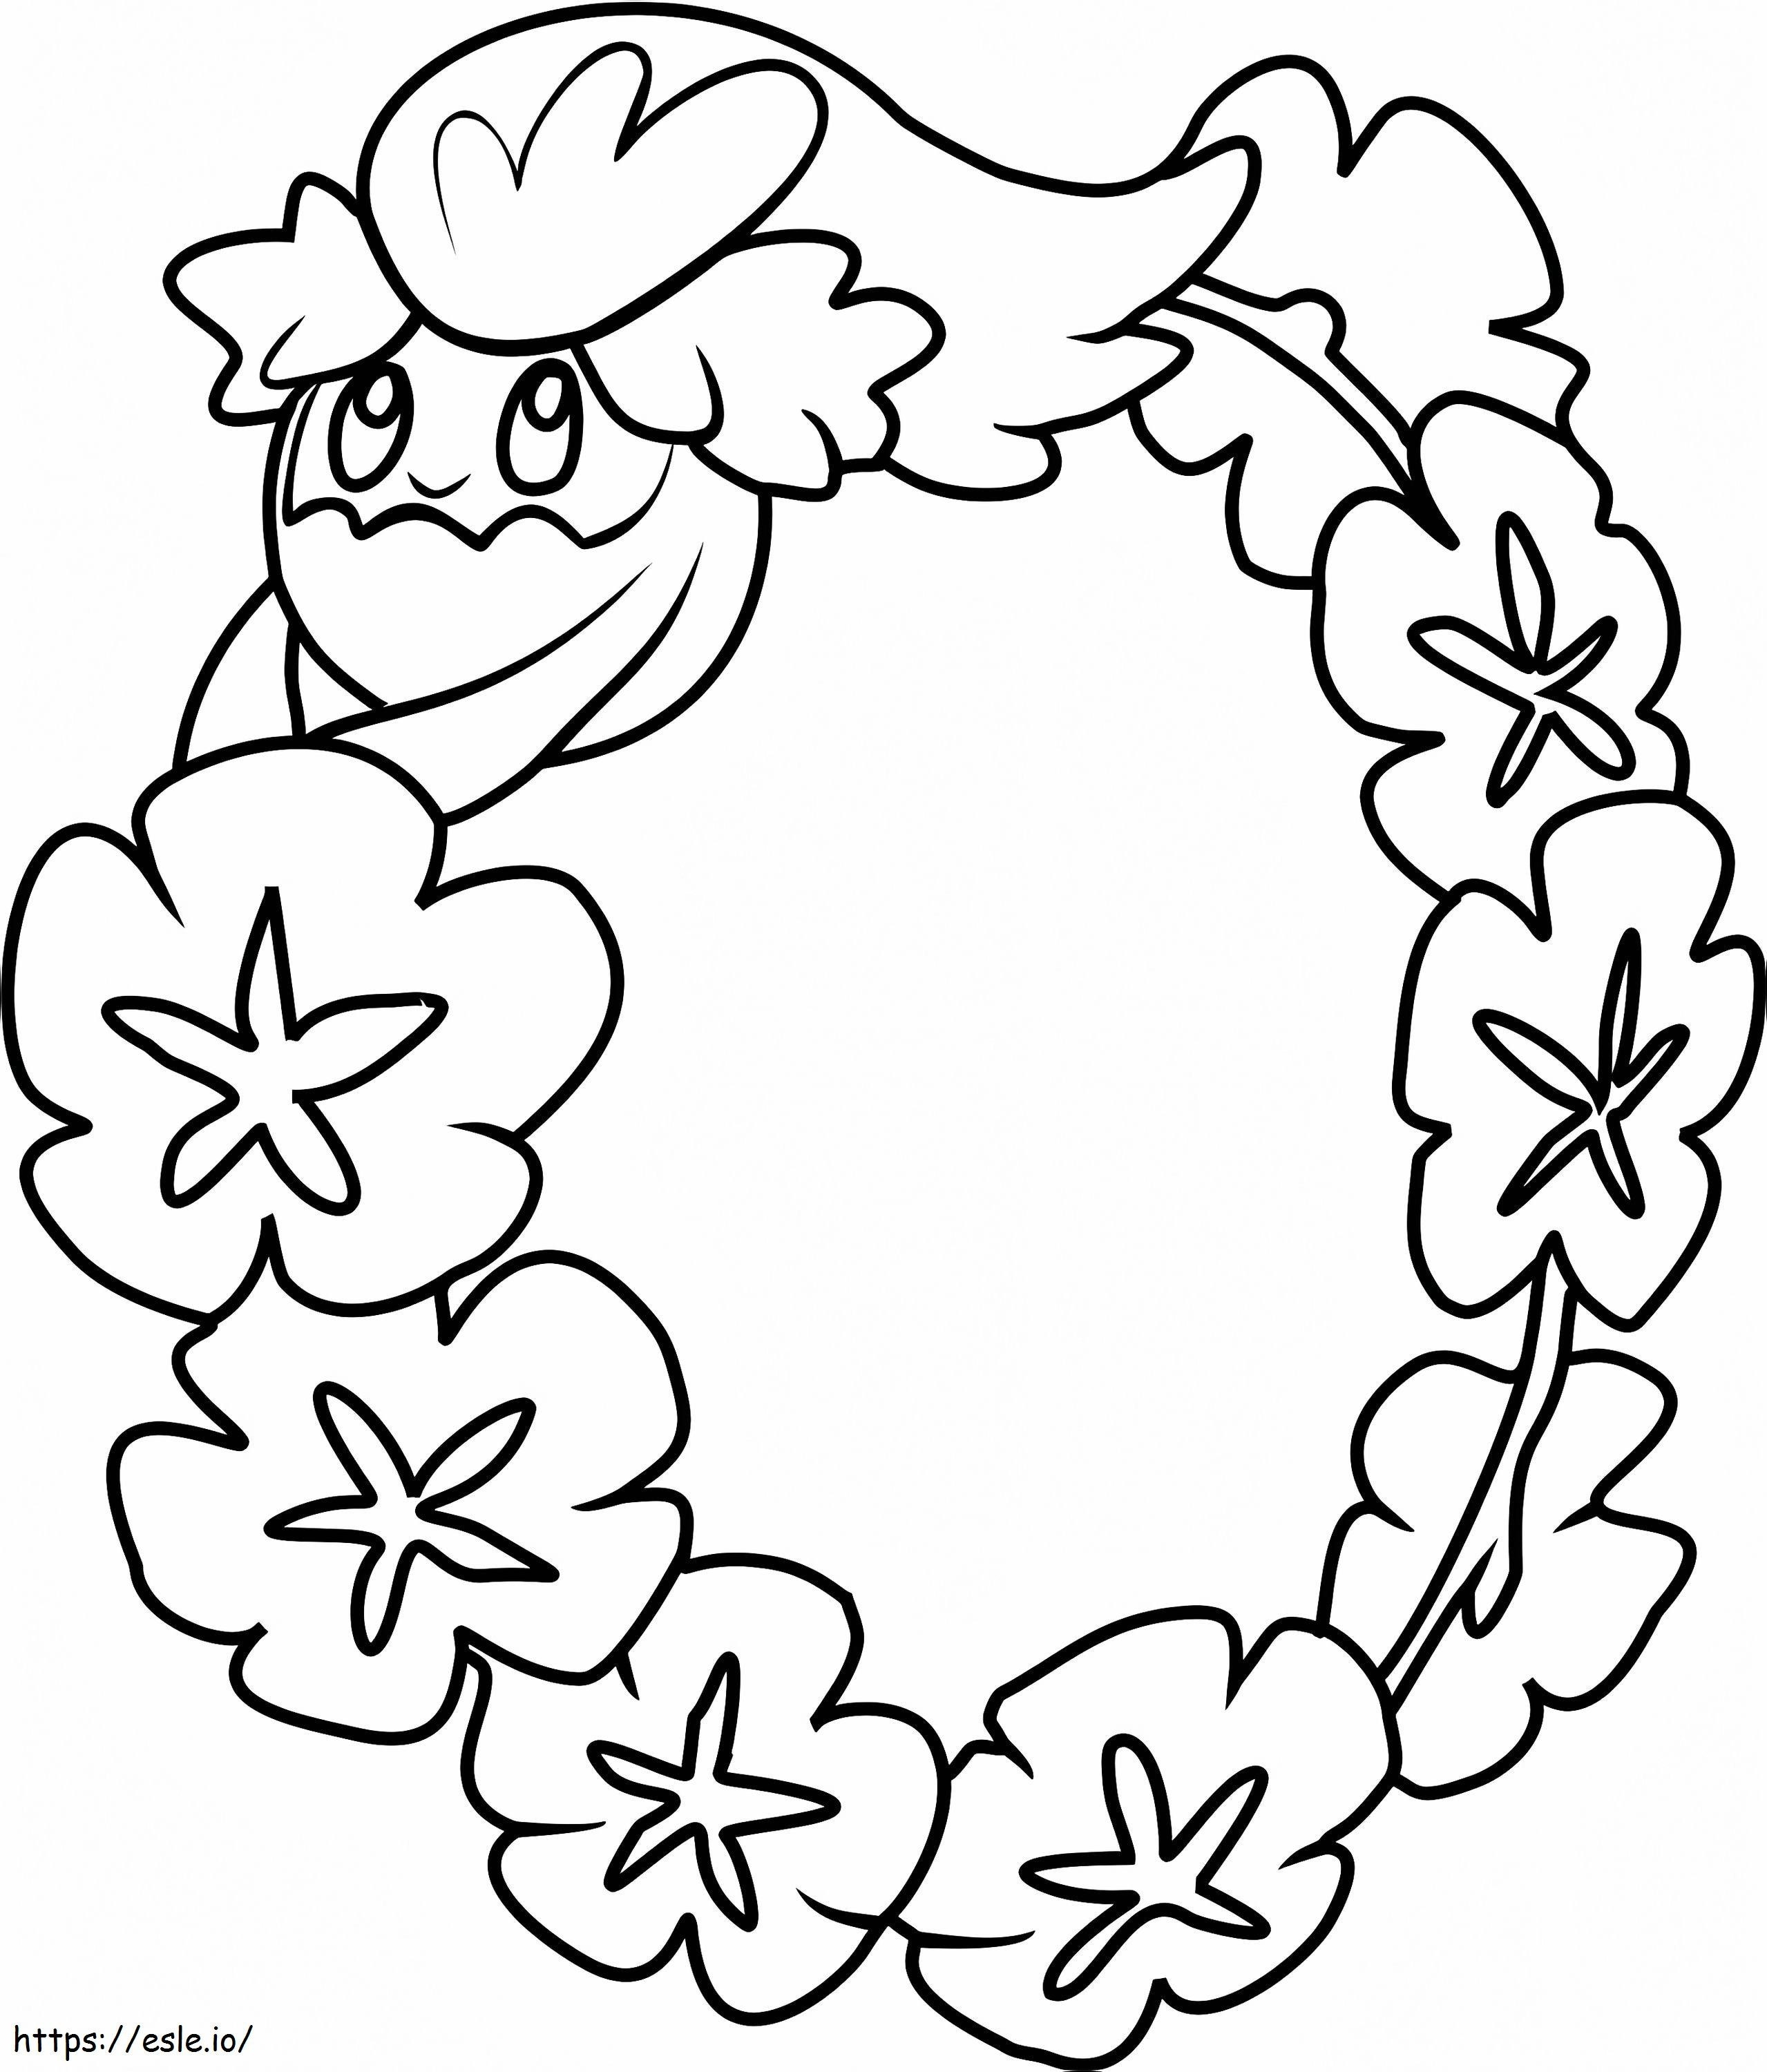 1529896749 2 coloring page